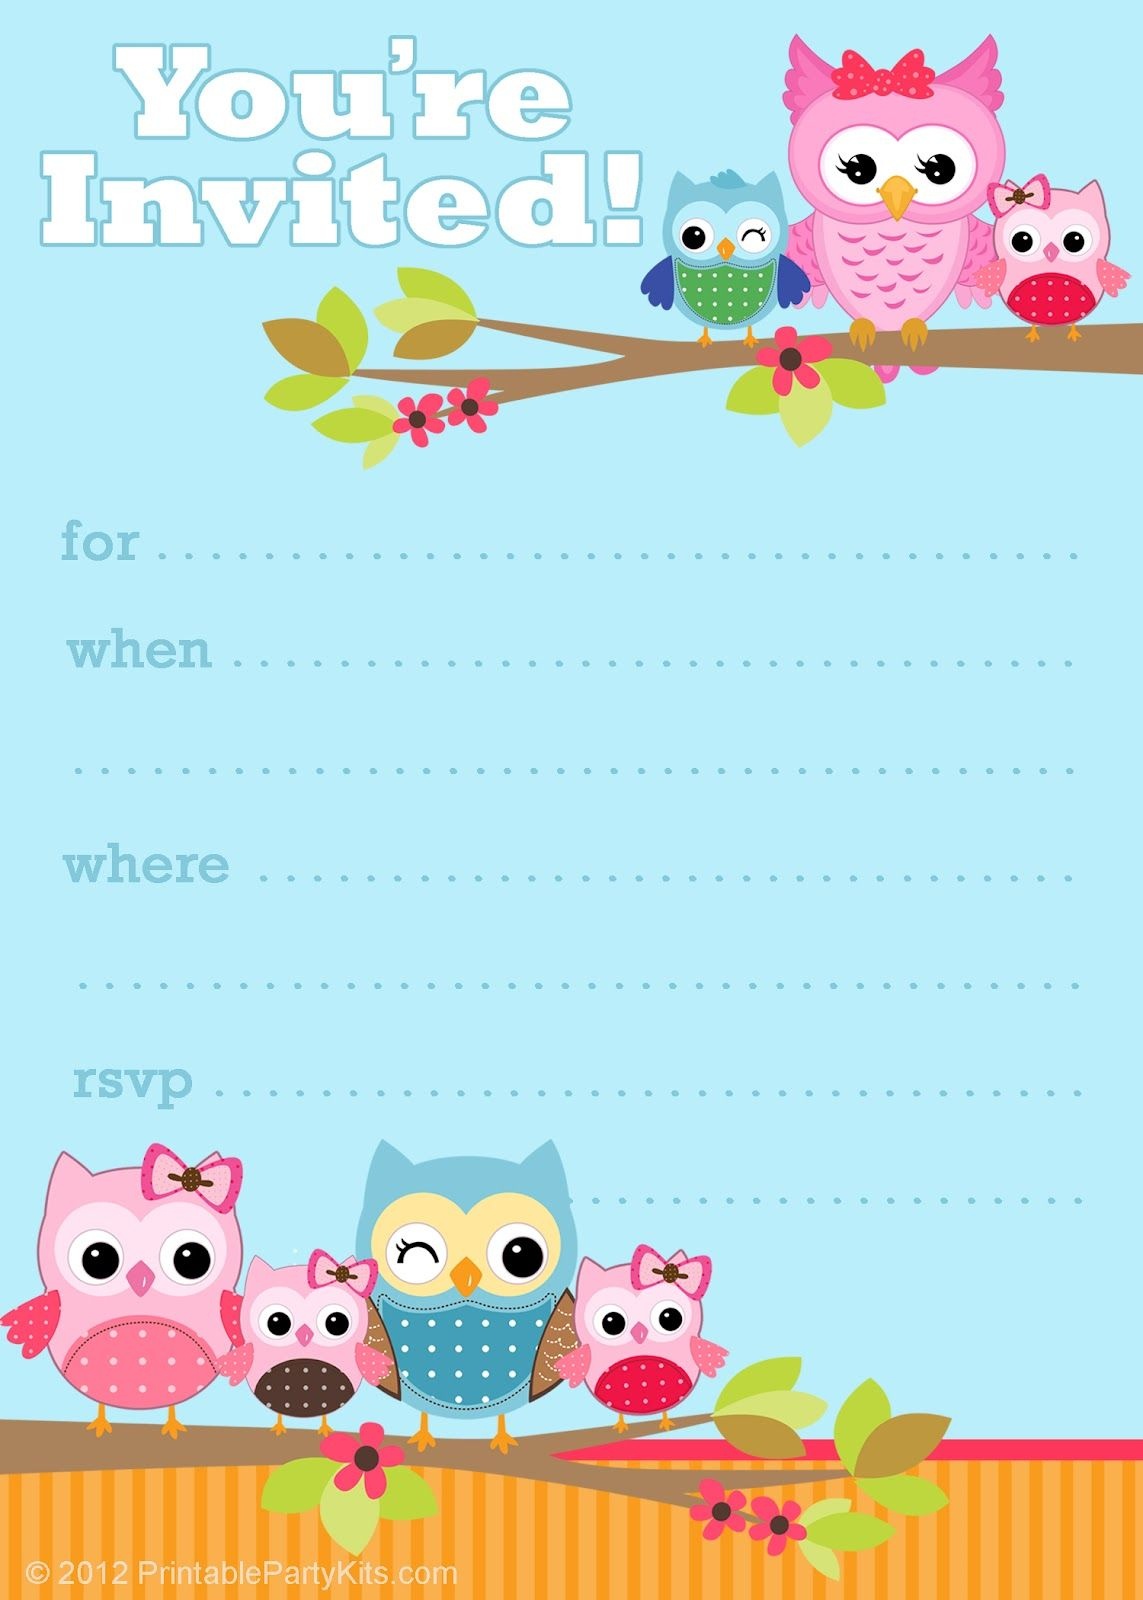 Free Printable Owl Invitations From Printablepartyinvitations - Free Printable Birthday Invitation Cards